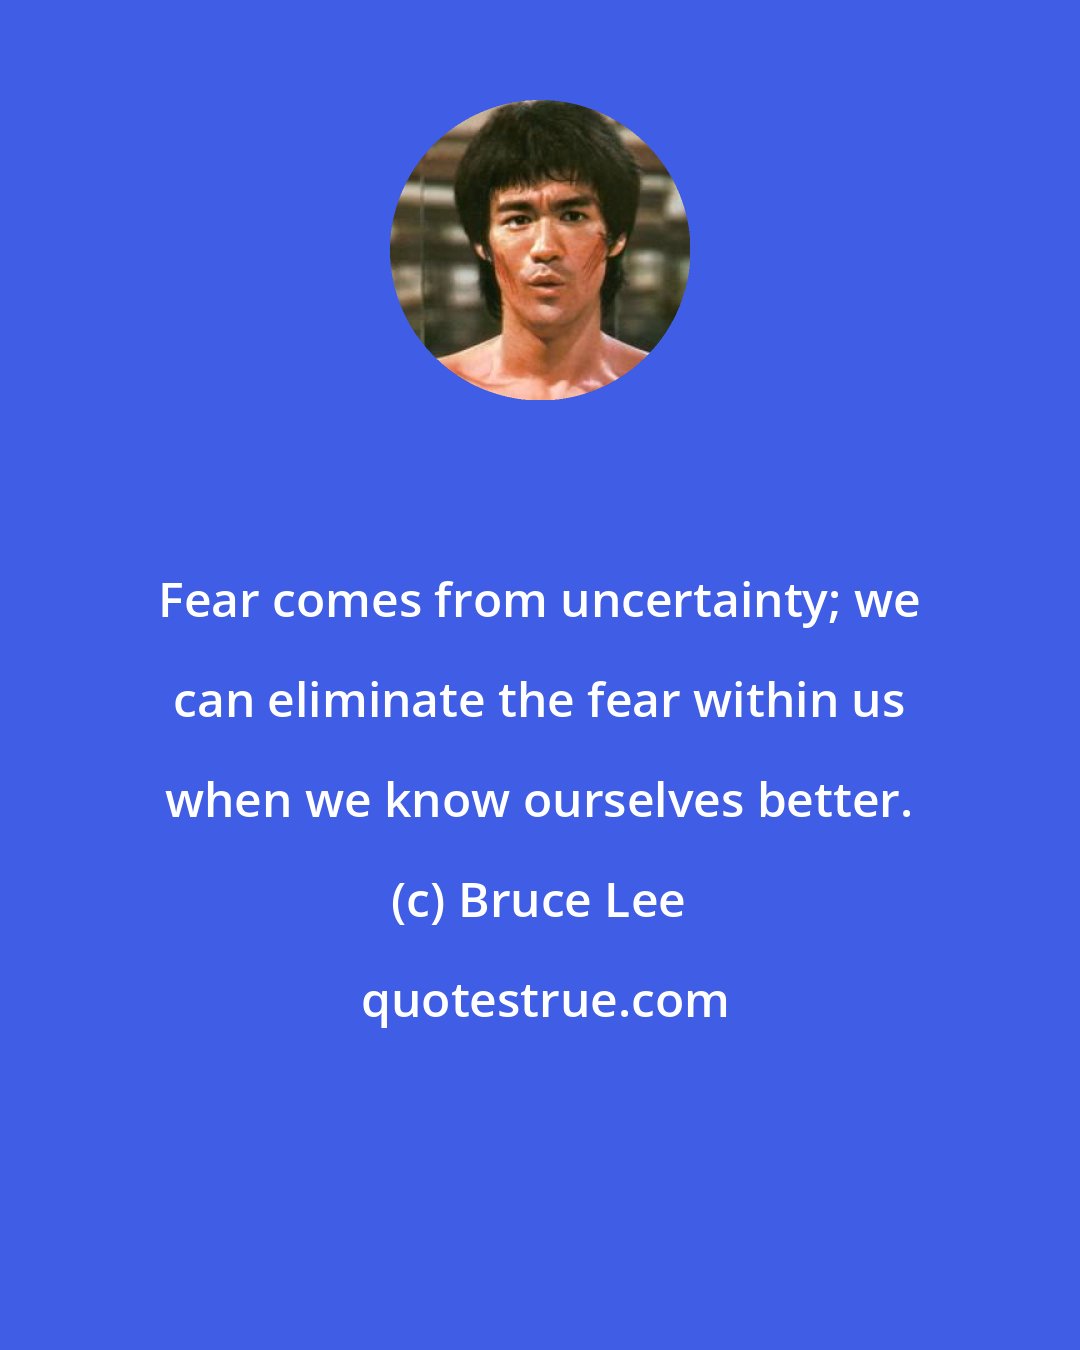 Bruce Lee: Fear comes from uncertainty; we can eliminate the fear within us when we know ourselves better.